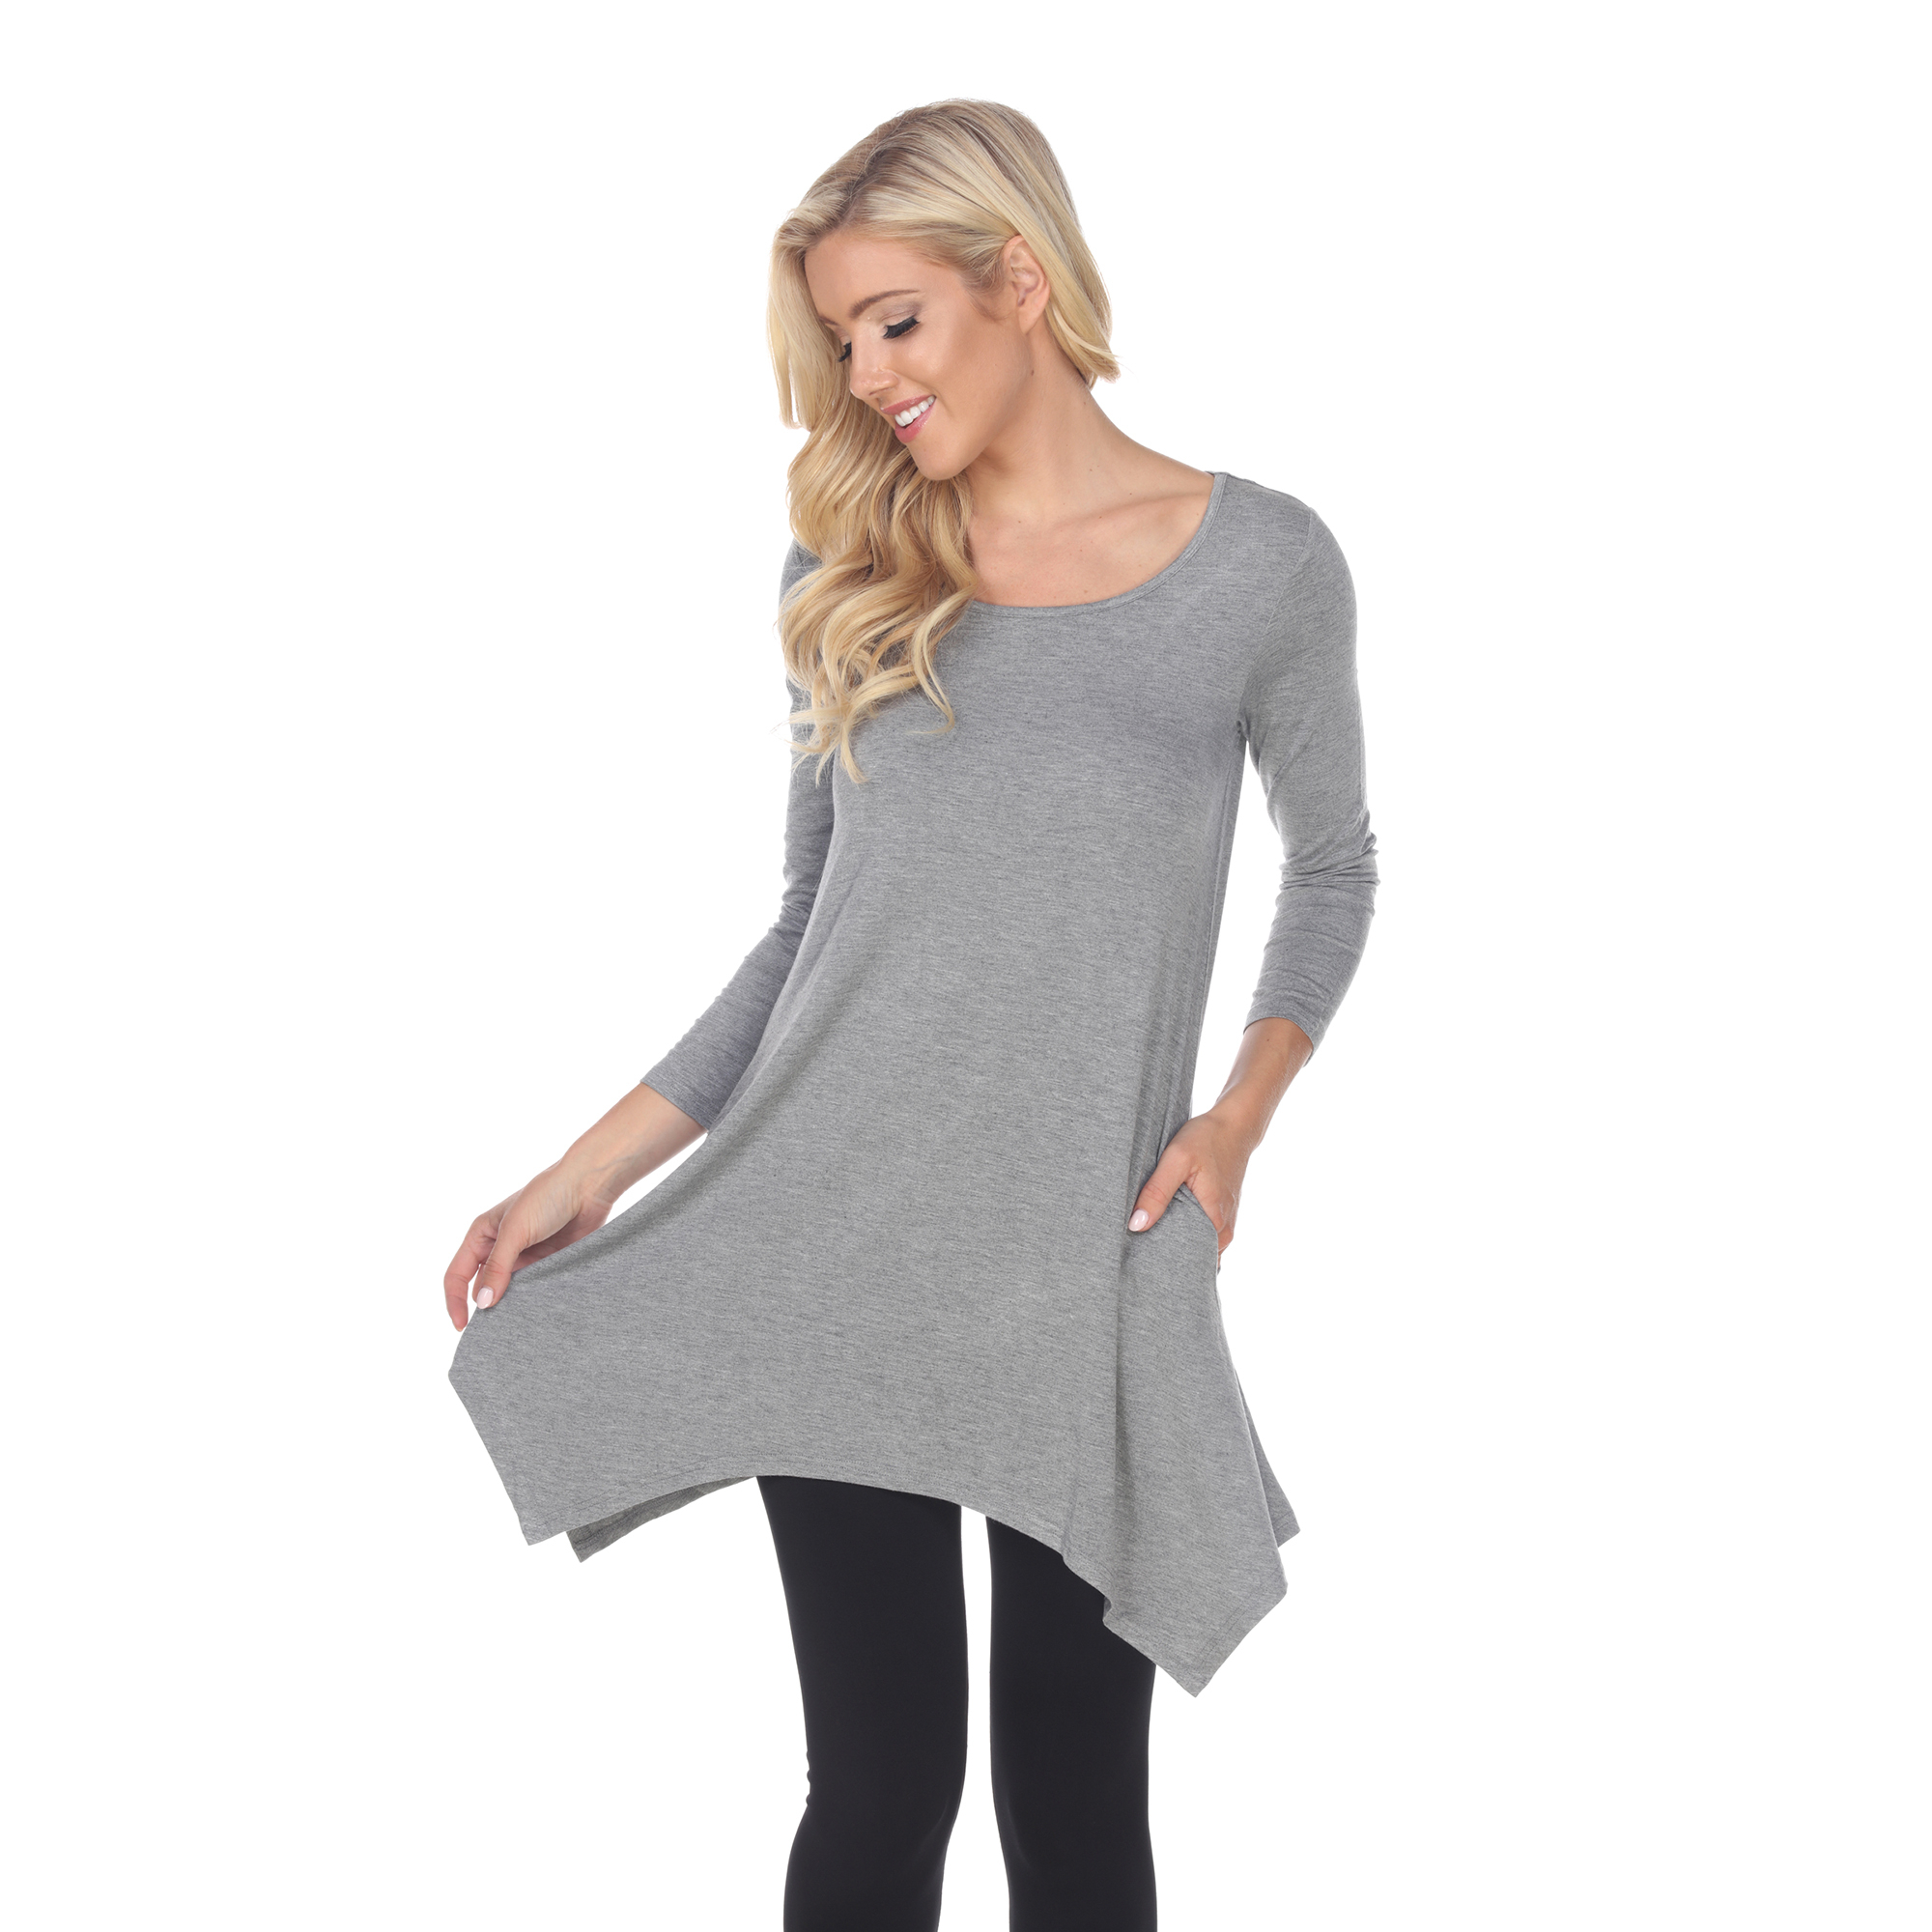 White Mark Women's Quarter Sleeve Tunic Top With Pockets - Charcoal, 5X